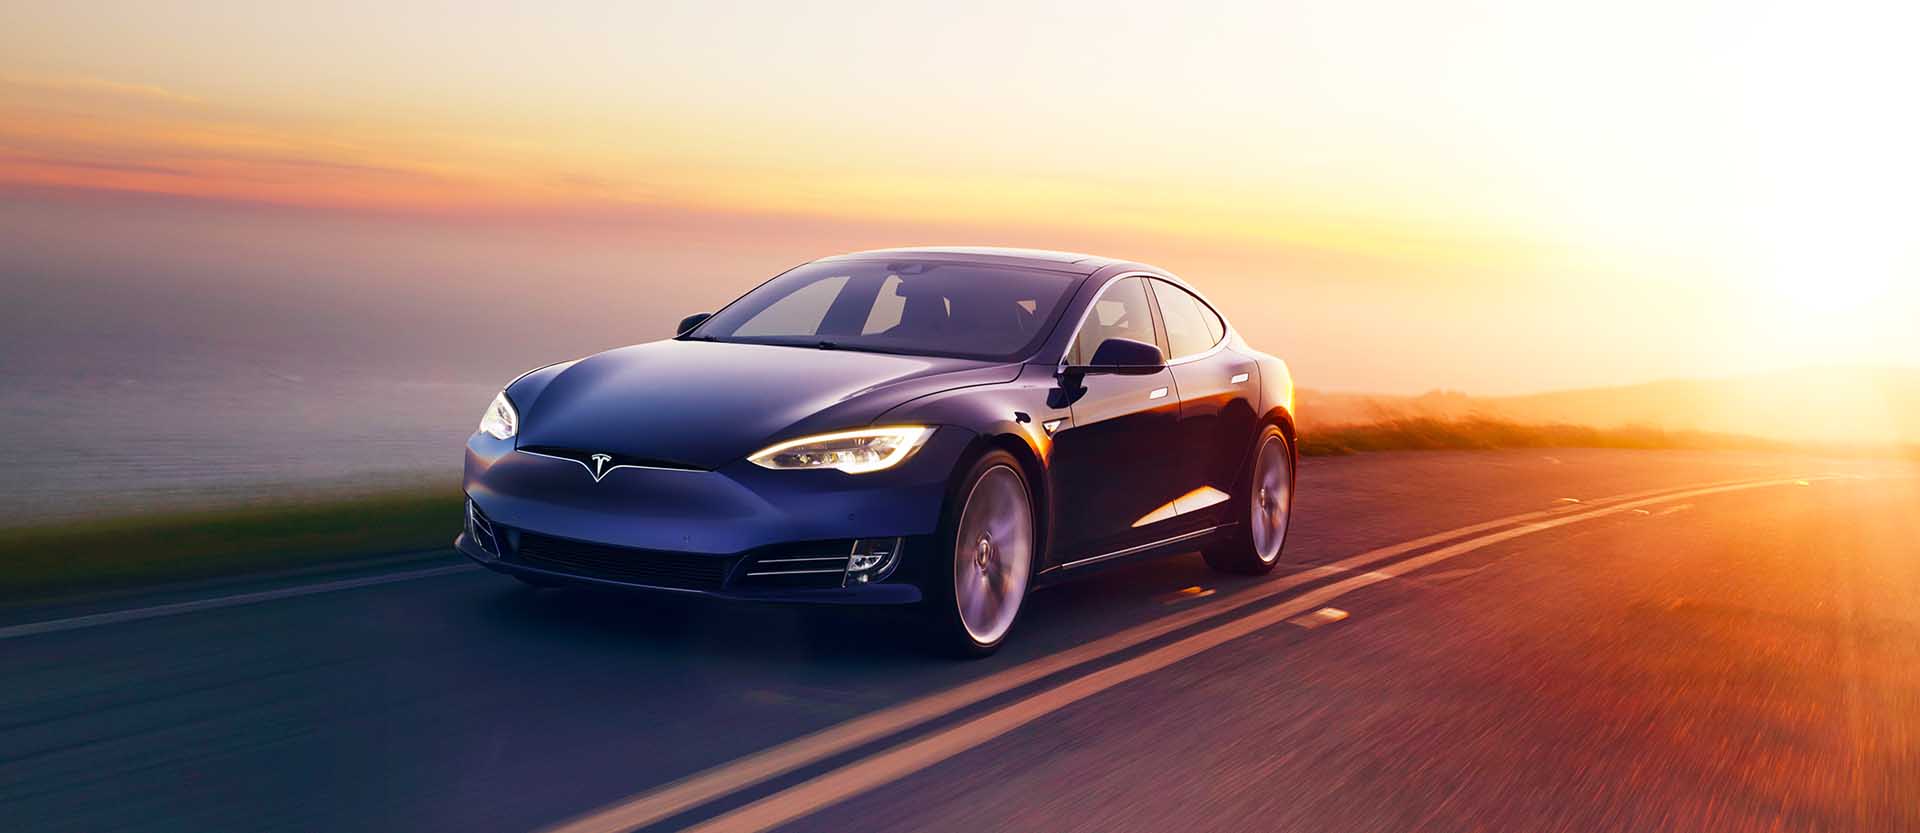 New And Used Tesla Model S Prices Photos Reviews Specs The Car Connection